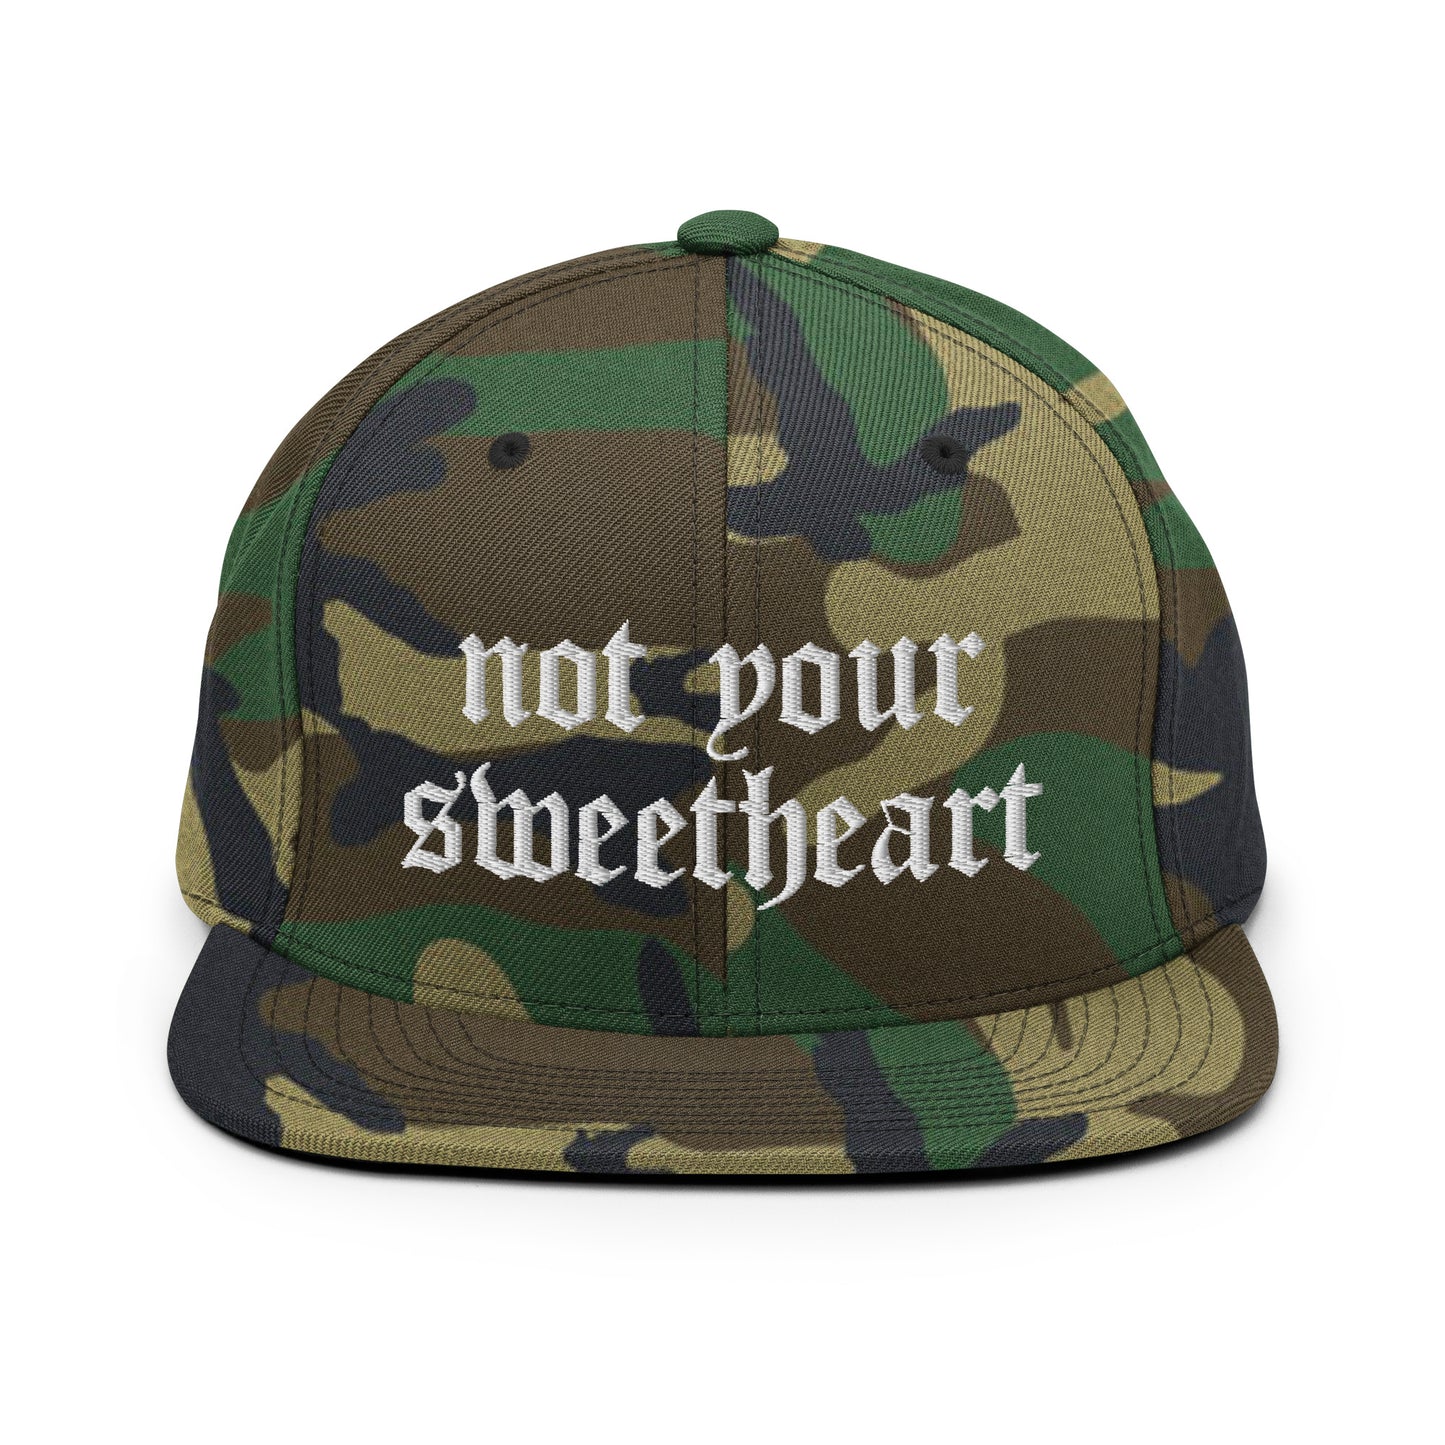 Not Your Sweetheart Snapback Hat